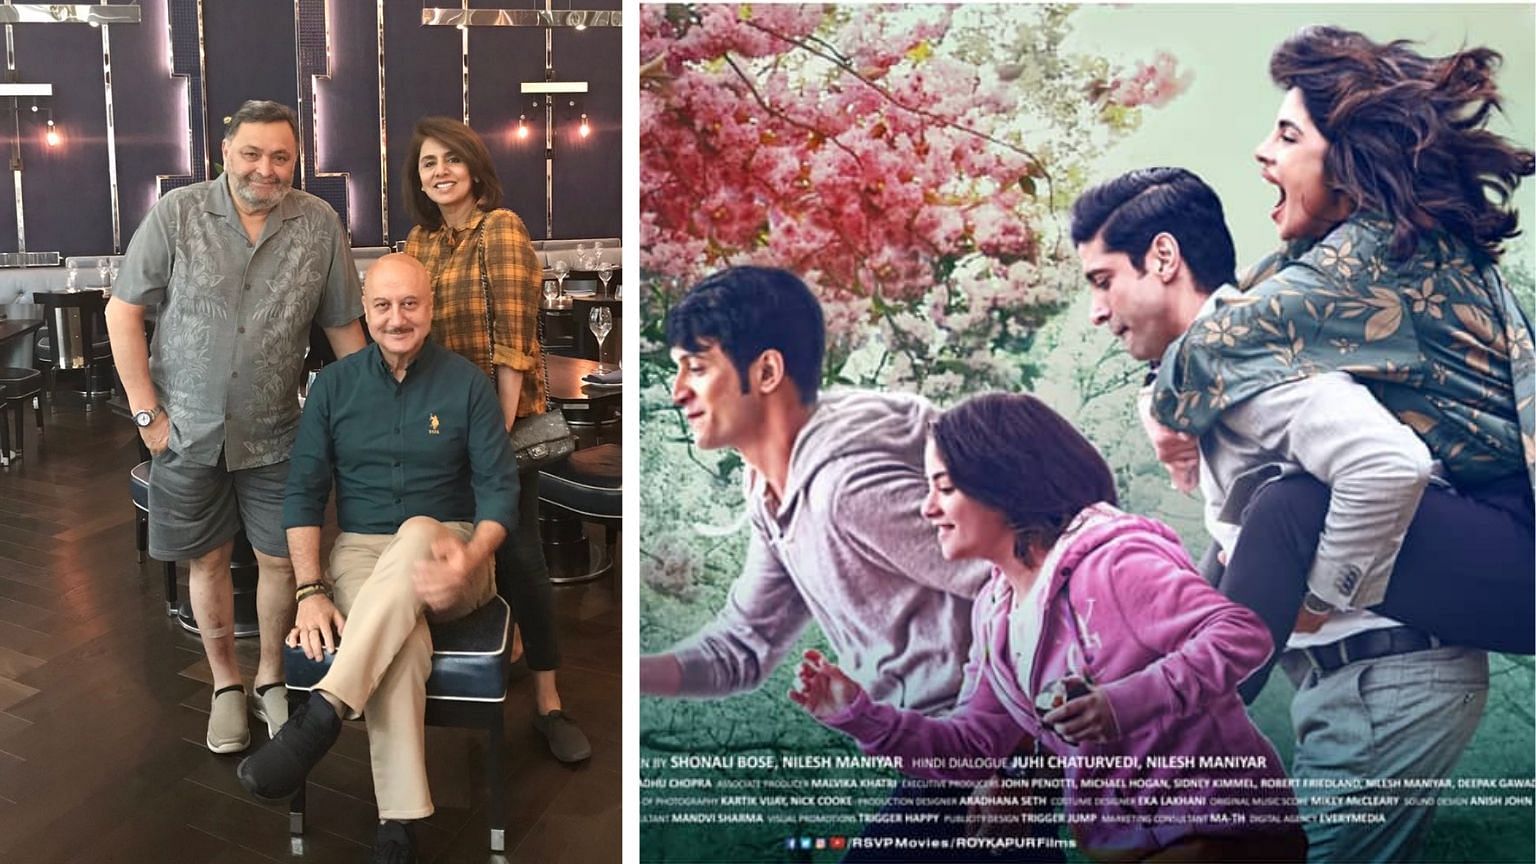 Anupam Kher with Rishi and Neetu Kapoor; <i>The Sky is Pink</i> poster.